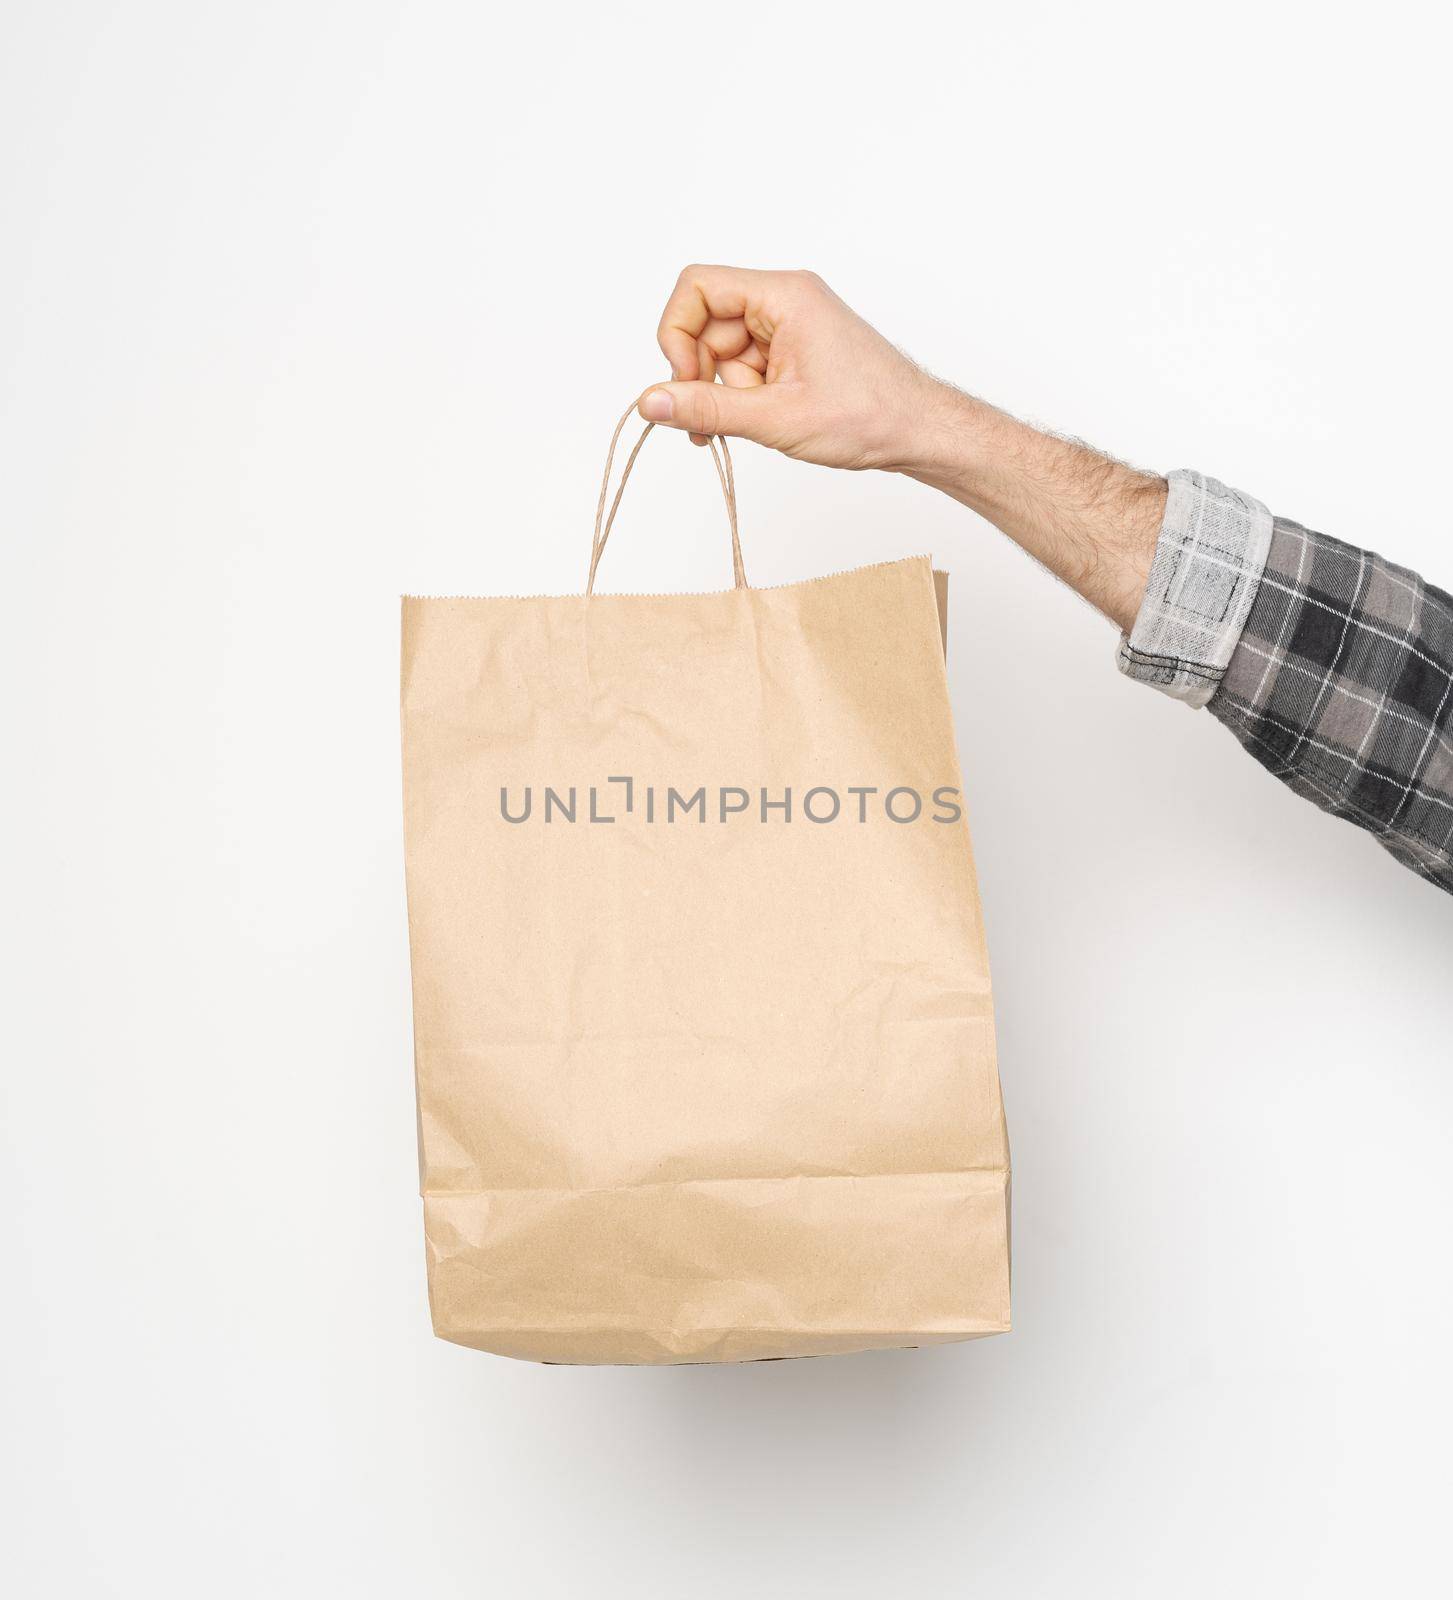 Male hand in plaid shirt twisted sleeve hand holding brown paper bag isolated on white background. Delivery concept. Paper bag for takeaway food. Square crop.